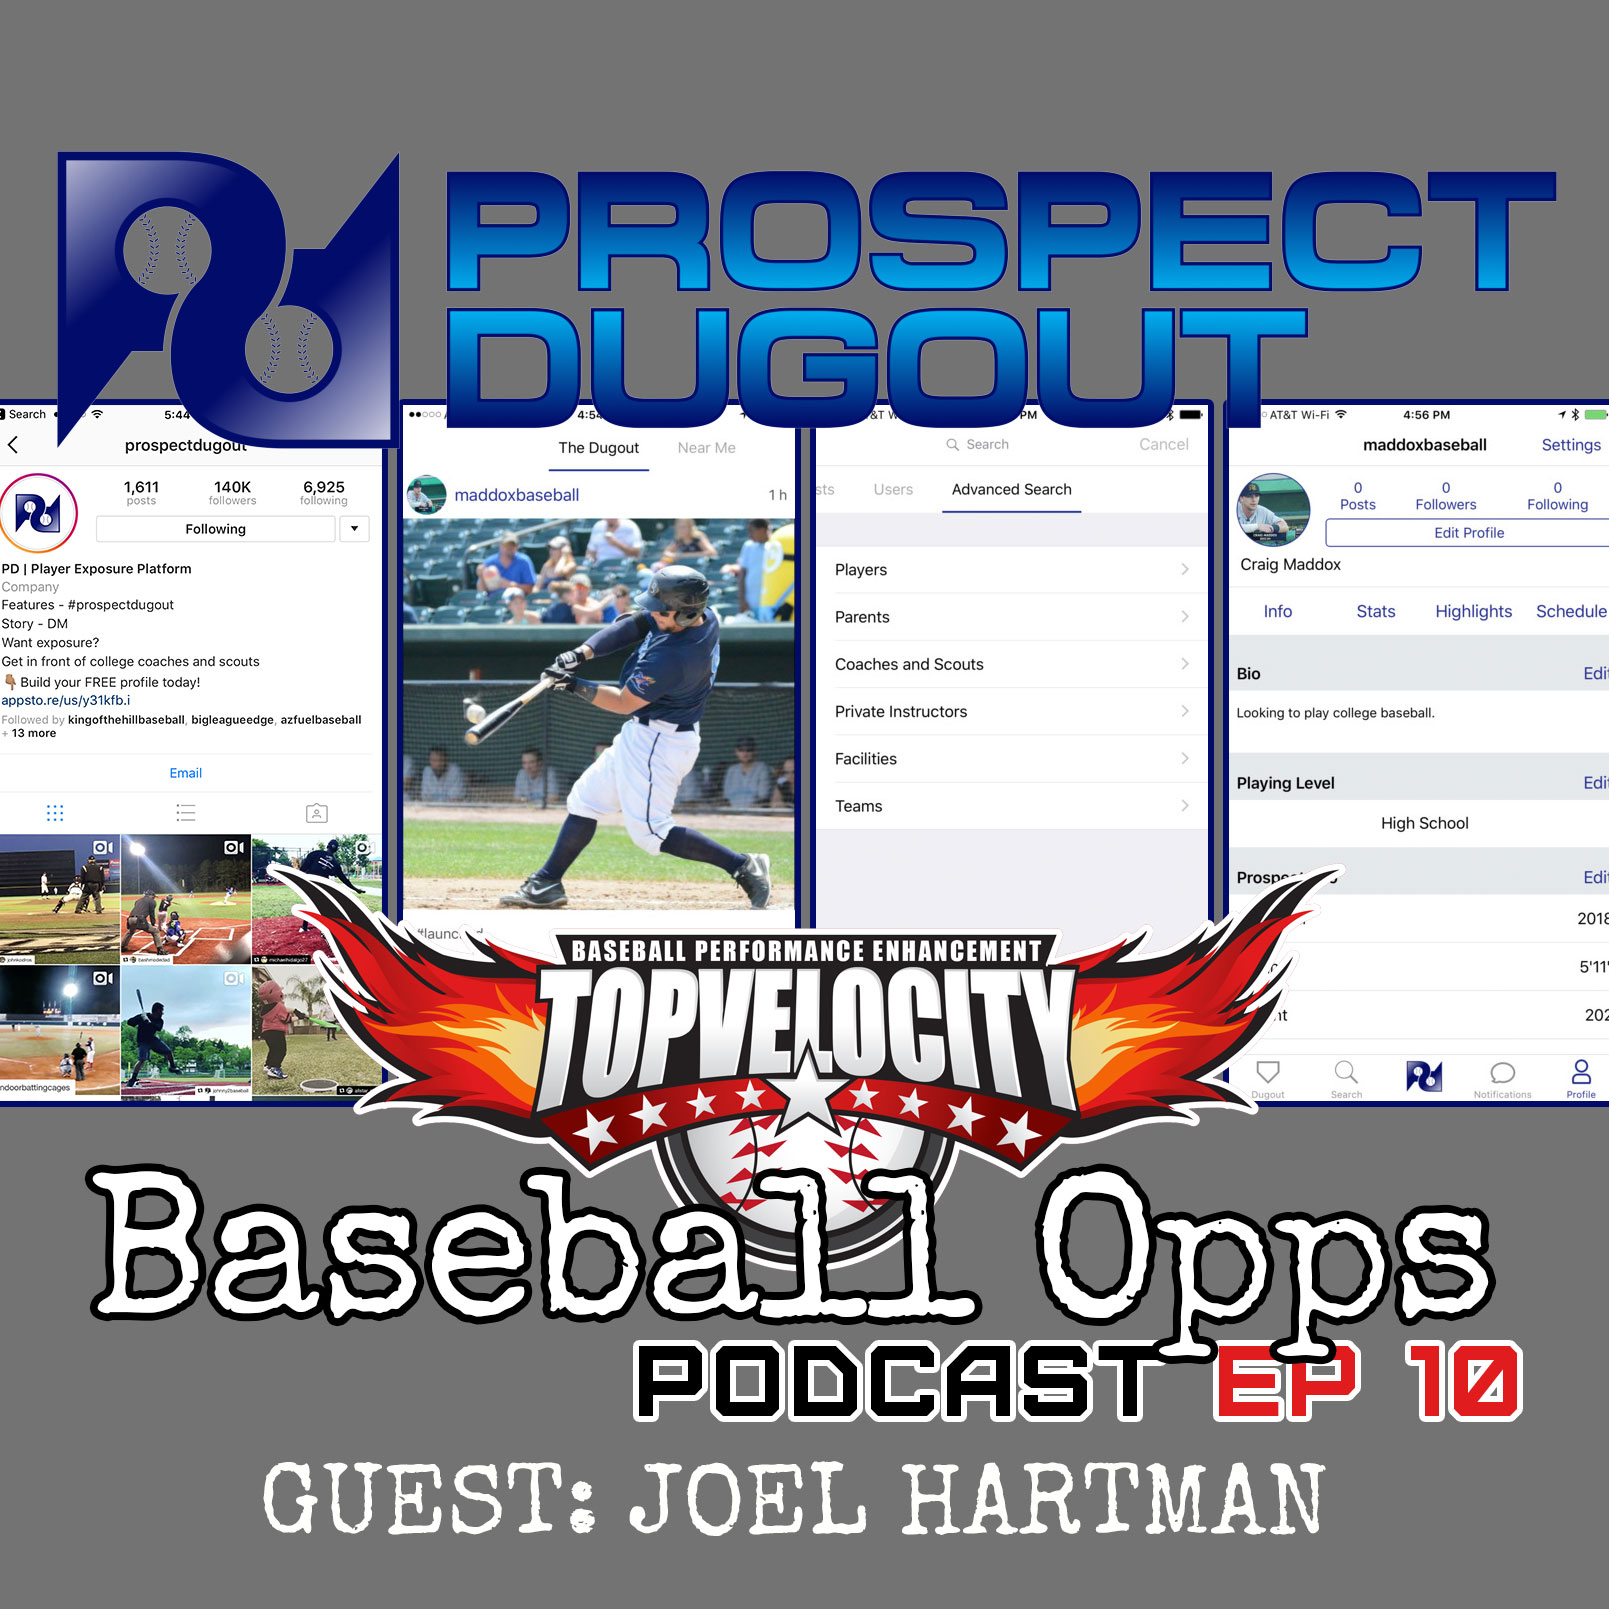 Gaining Exposure with Prospect Dugout on Baseball Opps with TopV